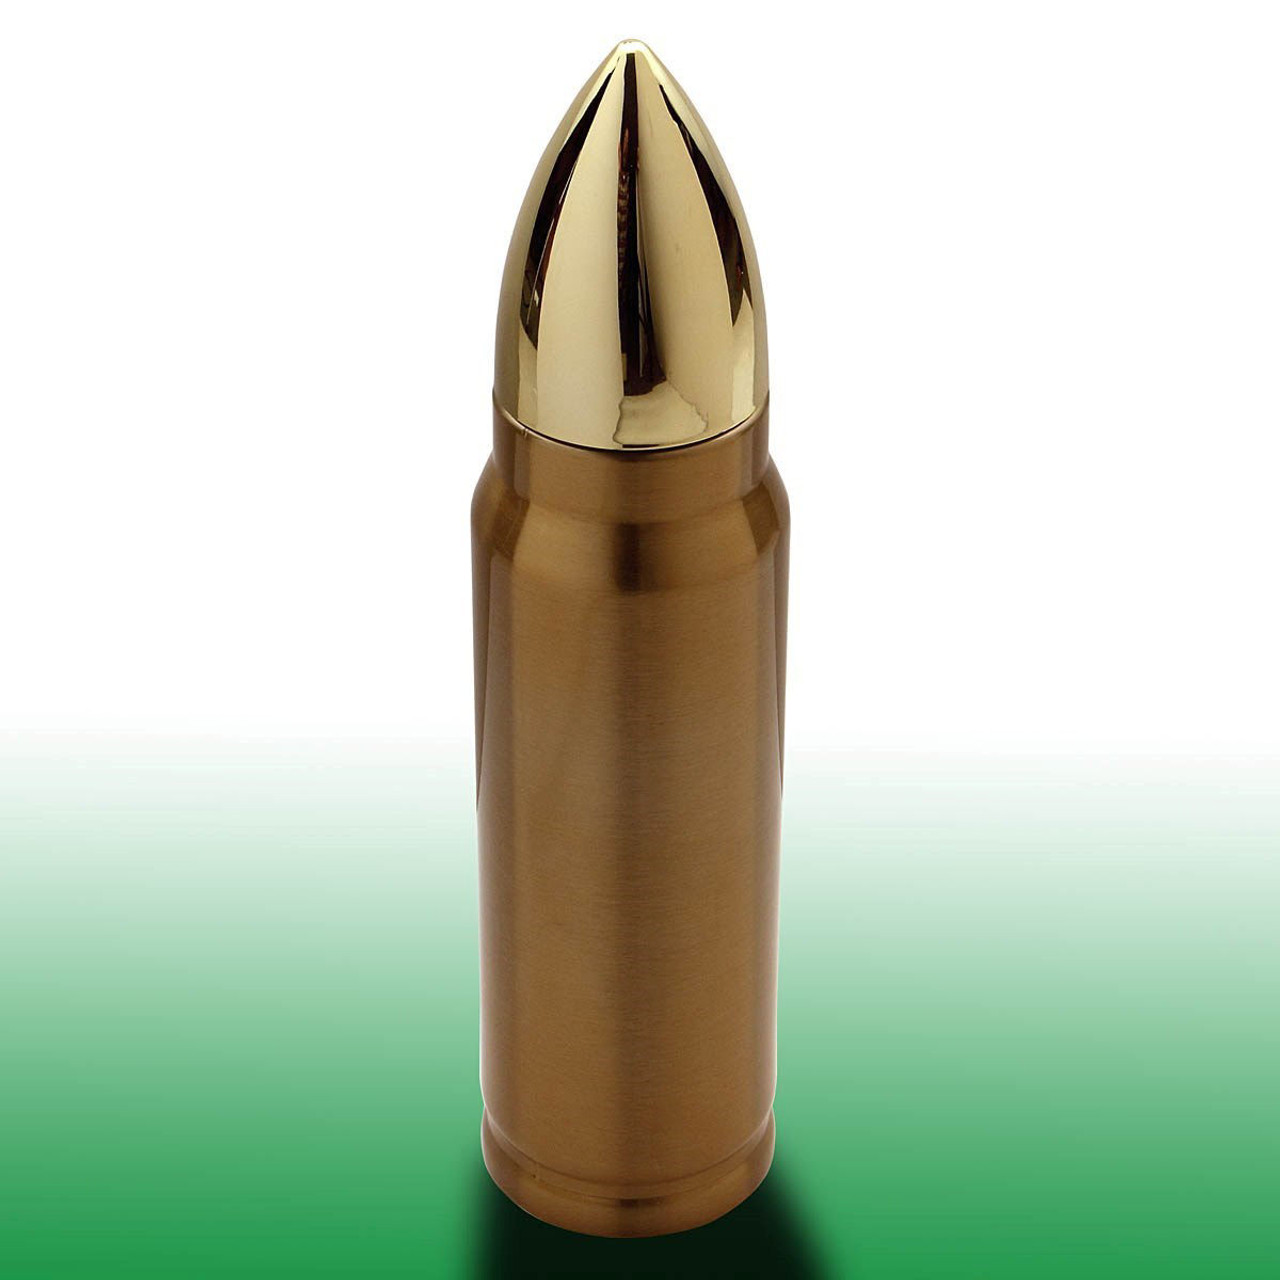 https://cdn11.bigcommerce.com/s-fy9rv139a5/images/stencil/1280x1280/products/9884/22575/0008635_wild-shot-bullet-vacuum-bottle-thermos__45750.1702982706.jpg?c=1